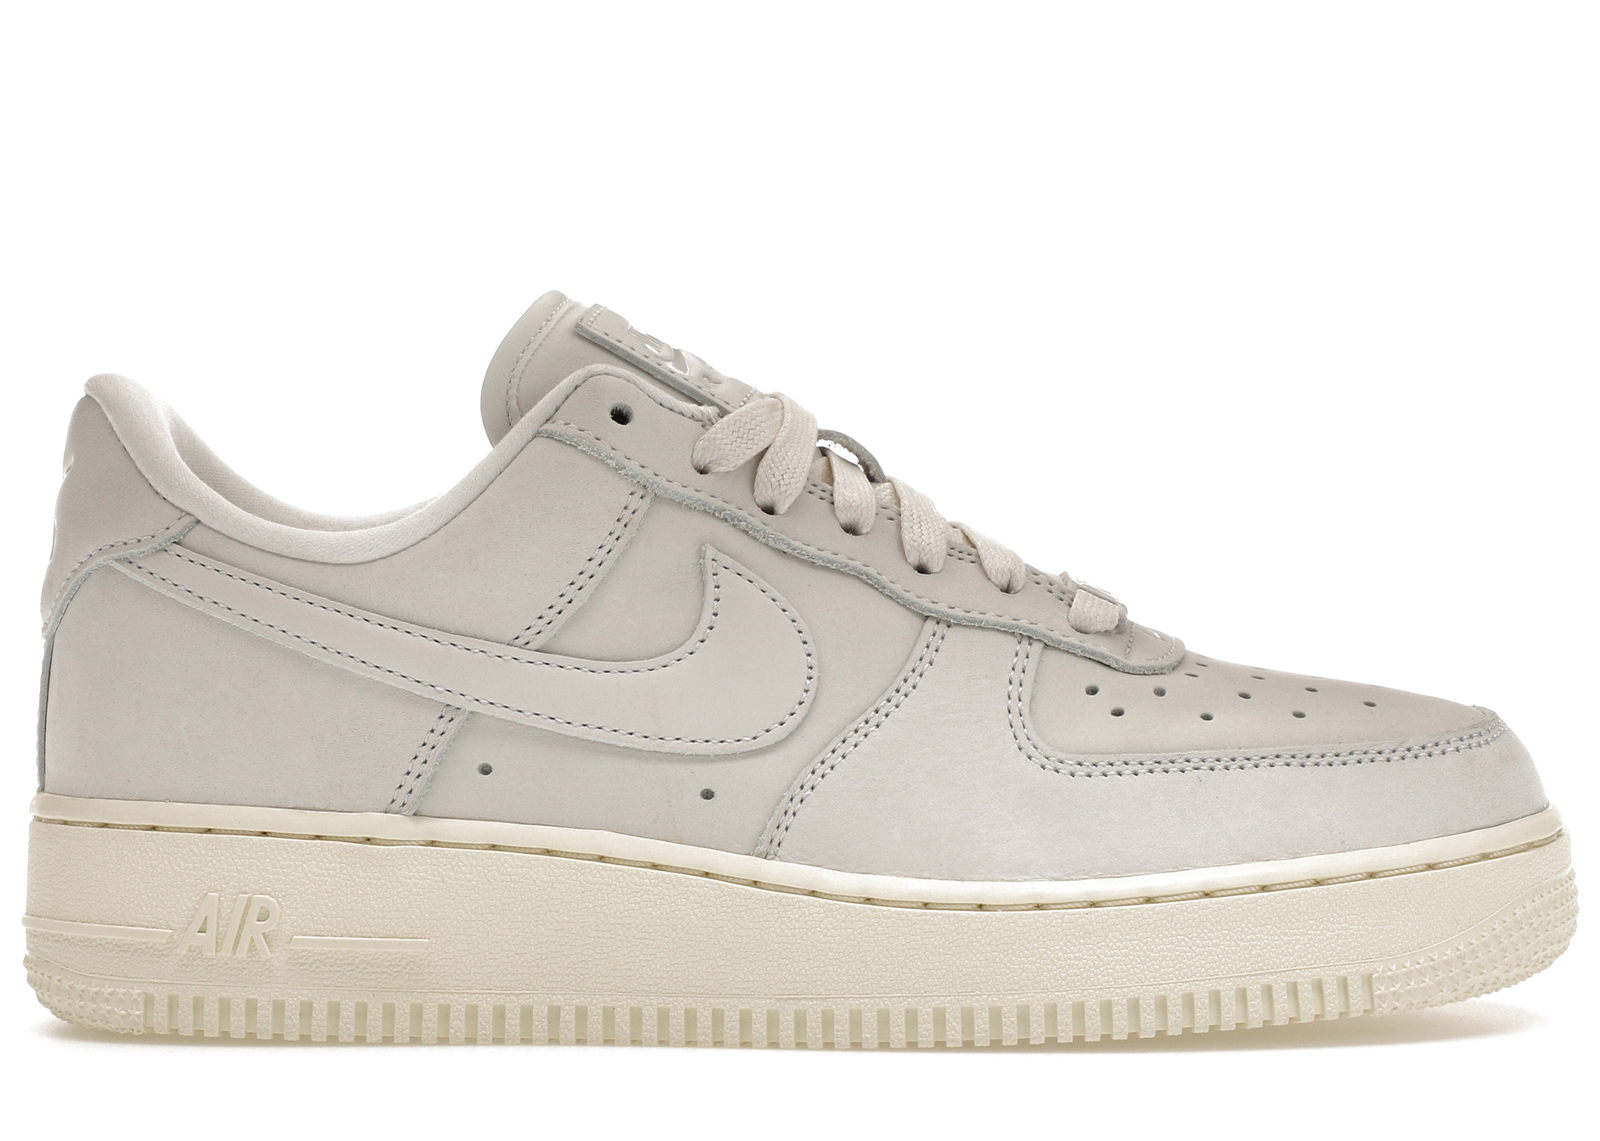 Nike Air Force 1 Low Summit White (Women's)